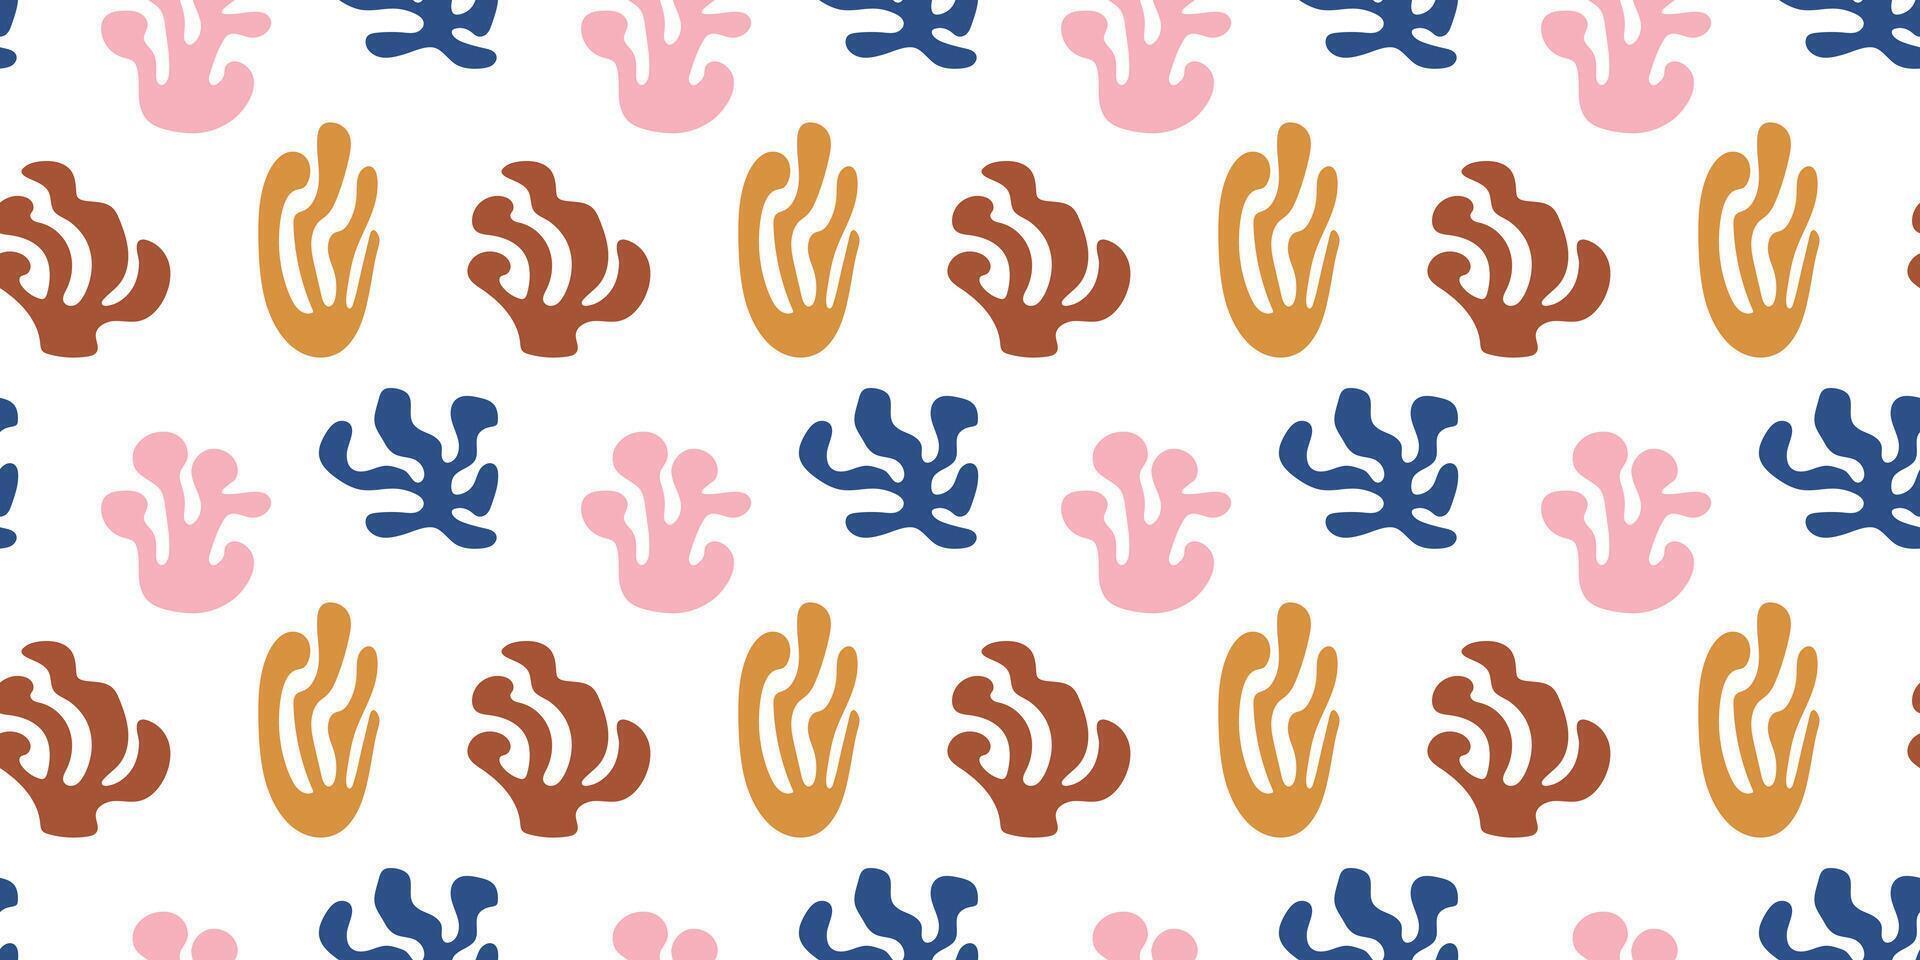 Matisse inspired modern abstract organic algae Seamless pattern in pastel colors. Vector underwater plants and Corals shapes. Background with hand drawn leaves silhouettes